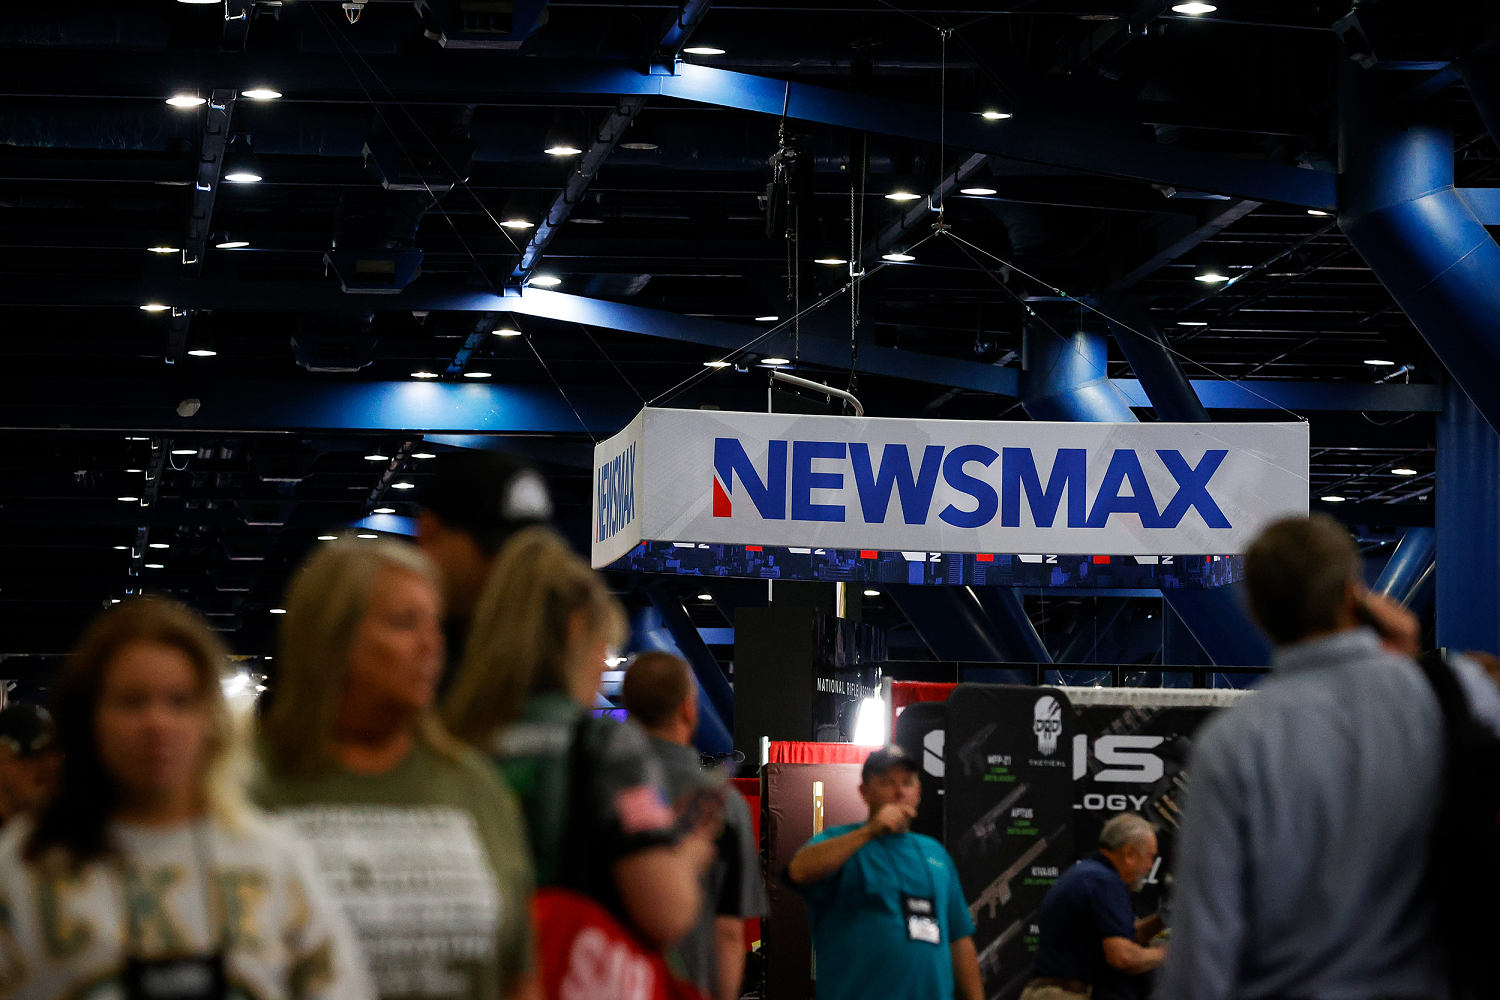 Voting machine firm Smartmatic alleges Newsmax has deleted evidence in lawsuit over false vote-rigging claims